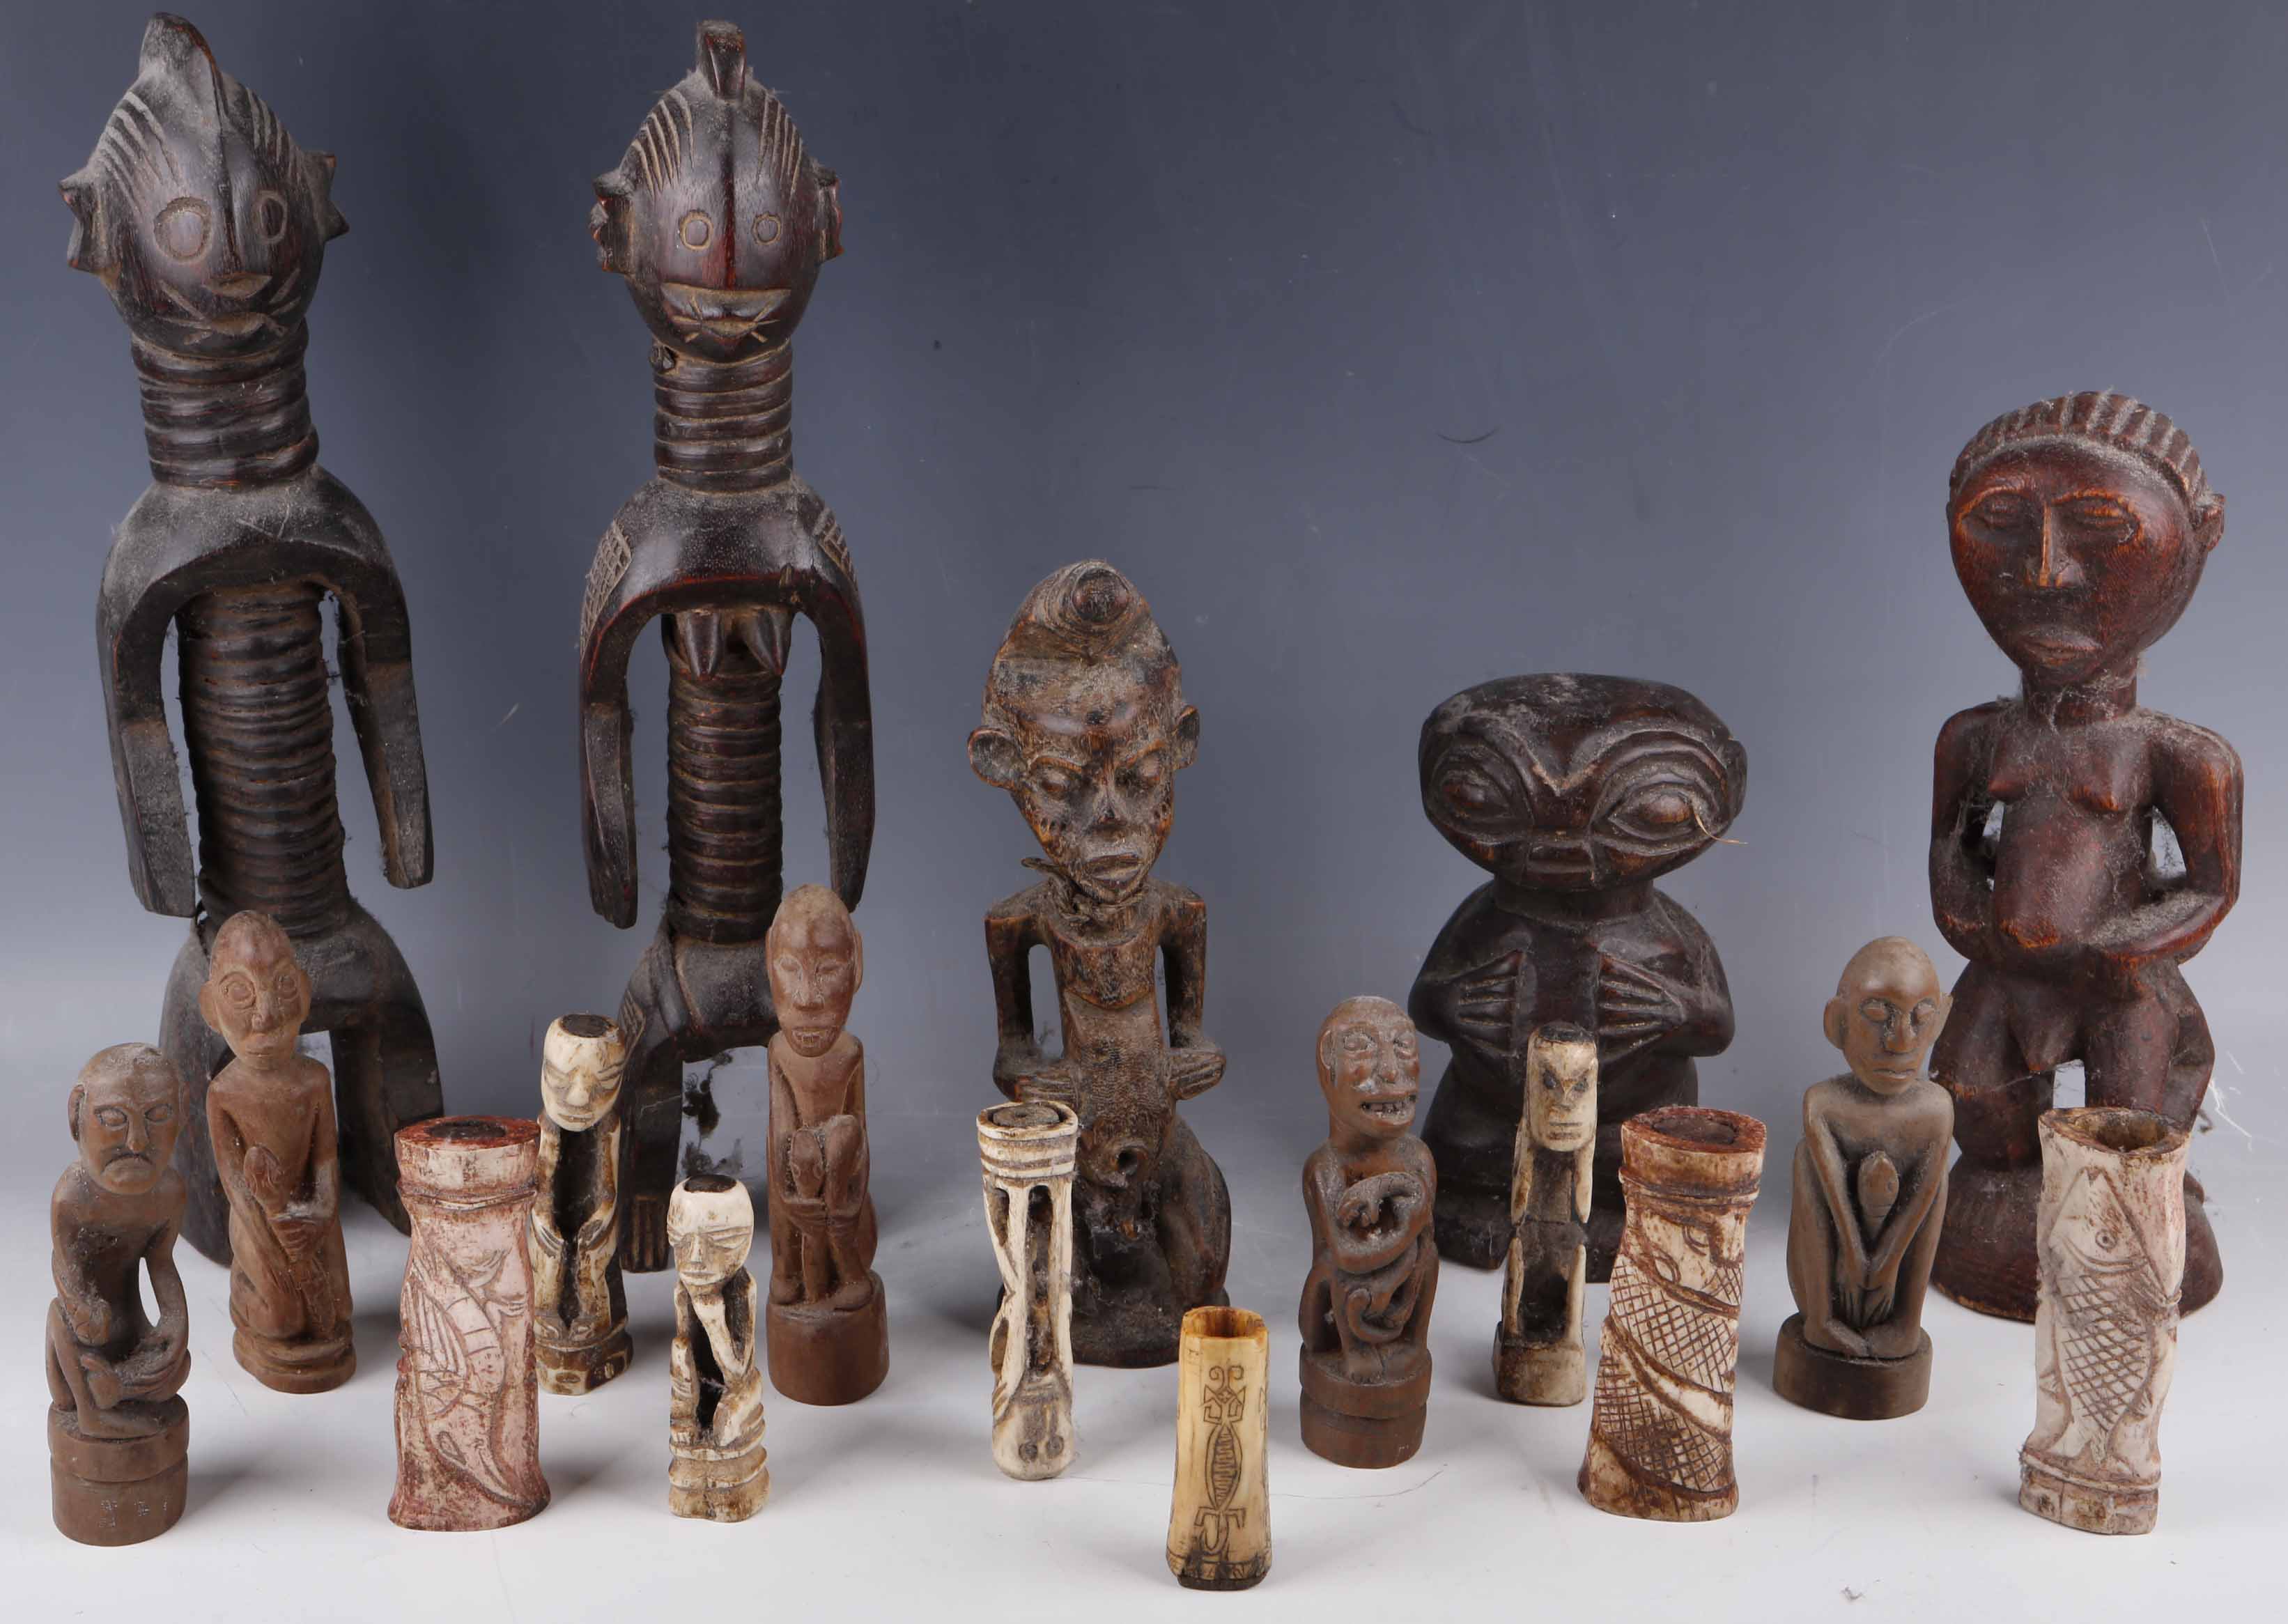 Central Africa, Congo, Benin, wooden tribal fertility carvings ...